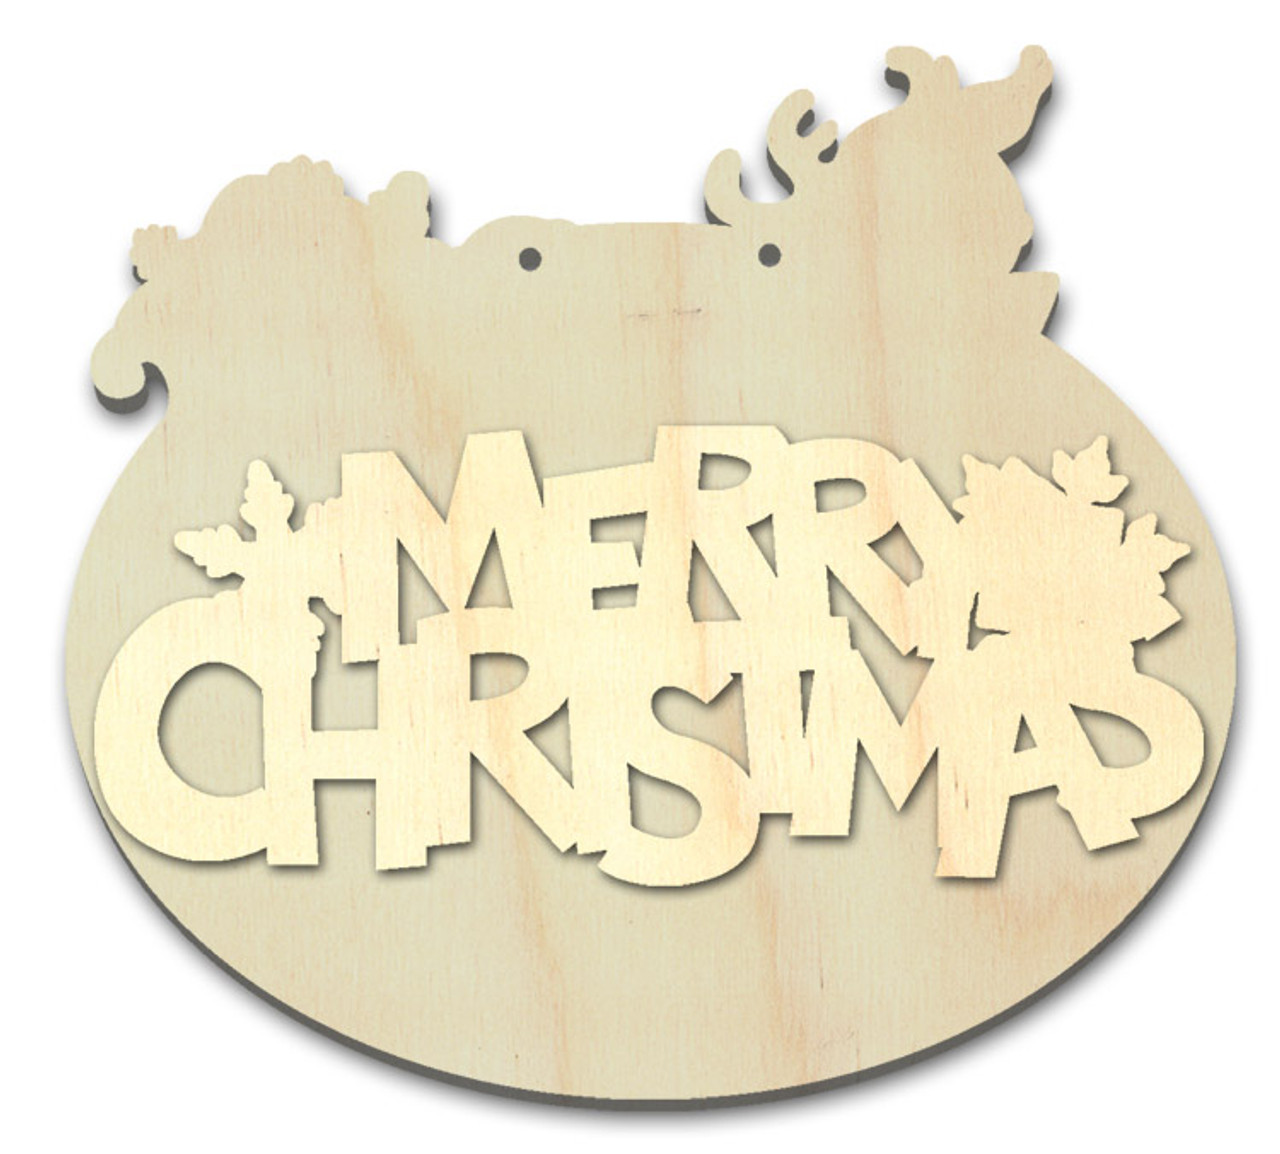 Merry Christmas Multipart Word Surface - Ornament - 4" x 3 1/2"